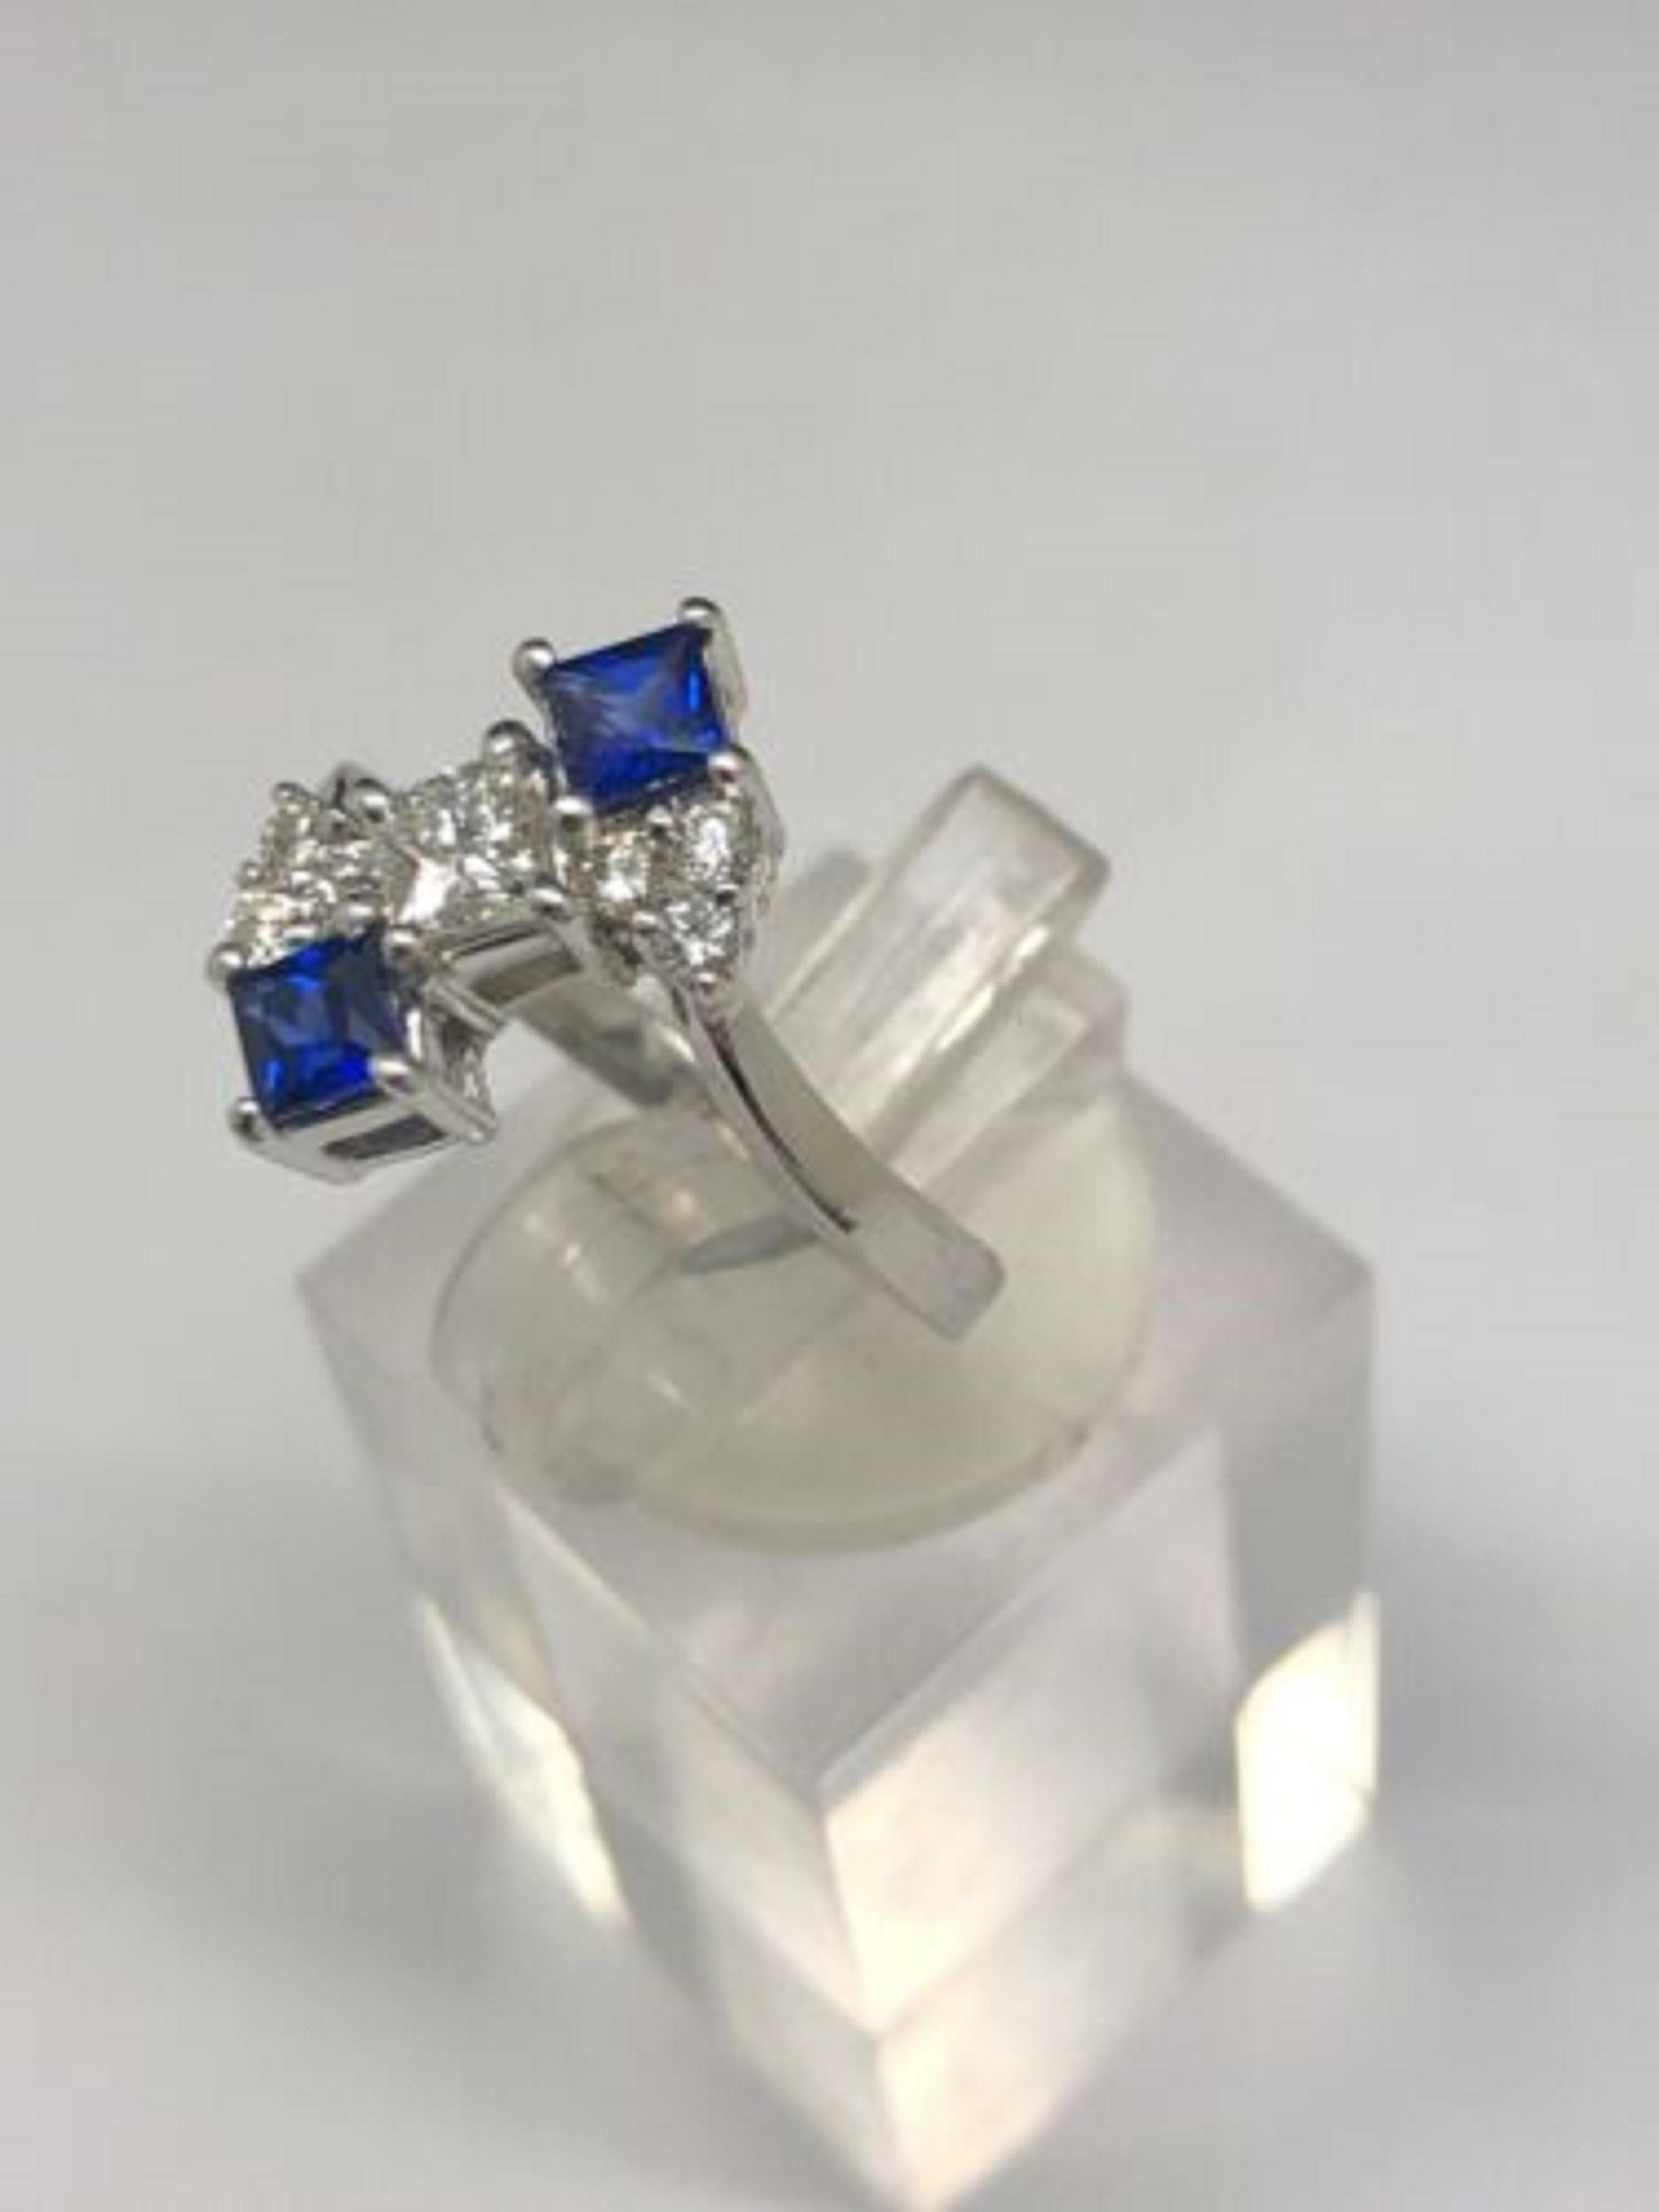 Up for sale:

This absolutely stunning solid 14k white gold princess cut blue sapphire gemstone with princess and round cut natural diamonds cocktail ring. This ring is featuring approx. 0.60ctw in blue sapphire gemstone and .48ctw in princess and